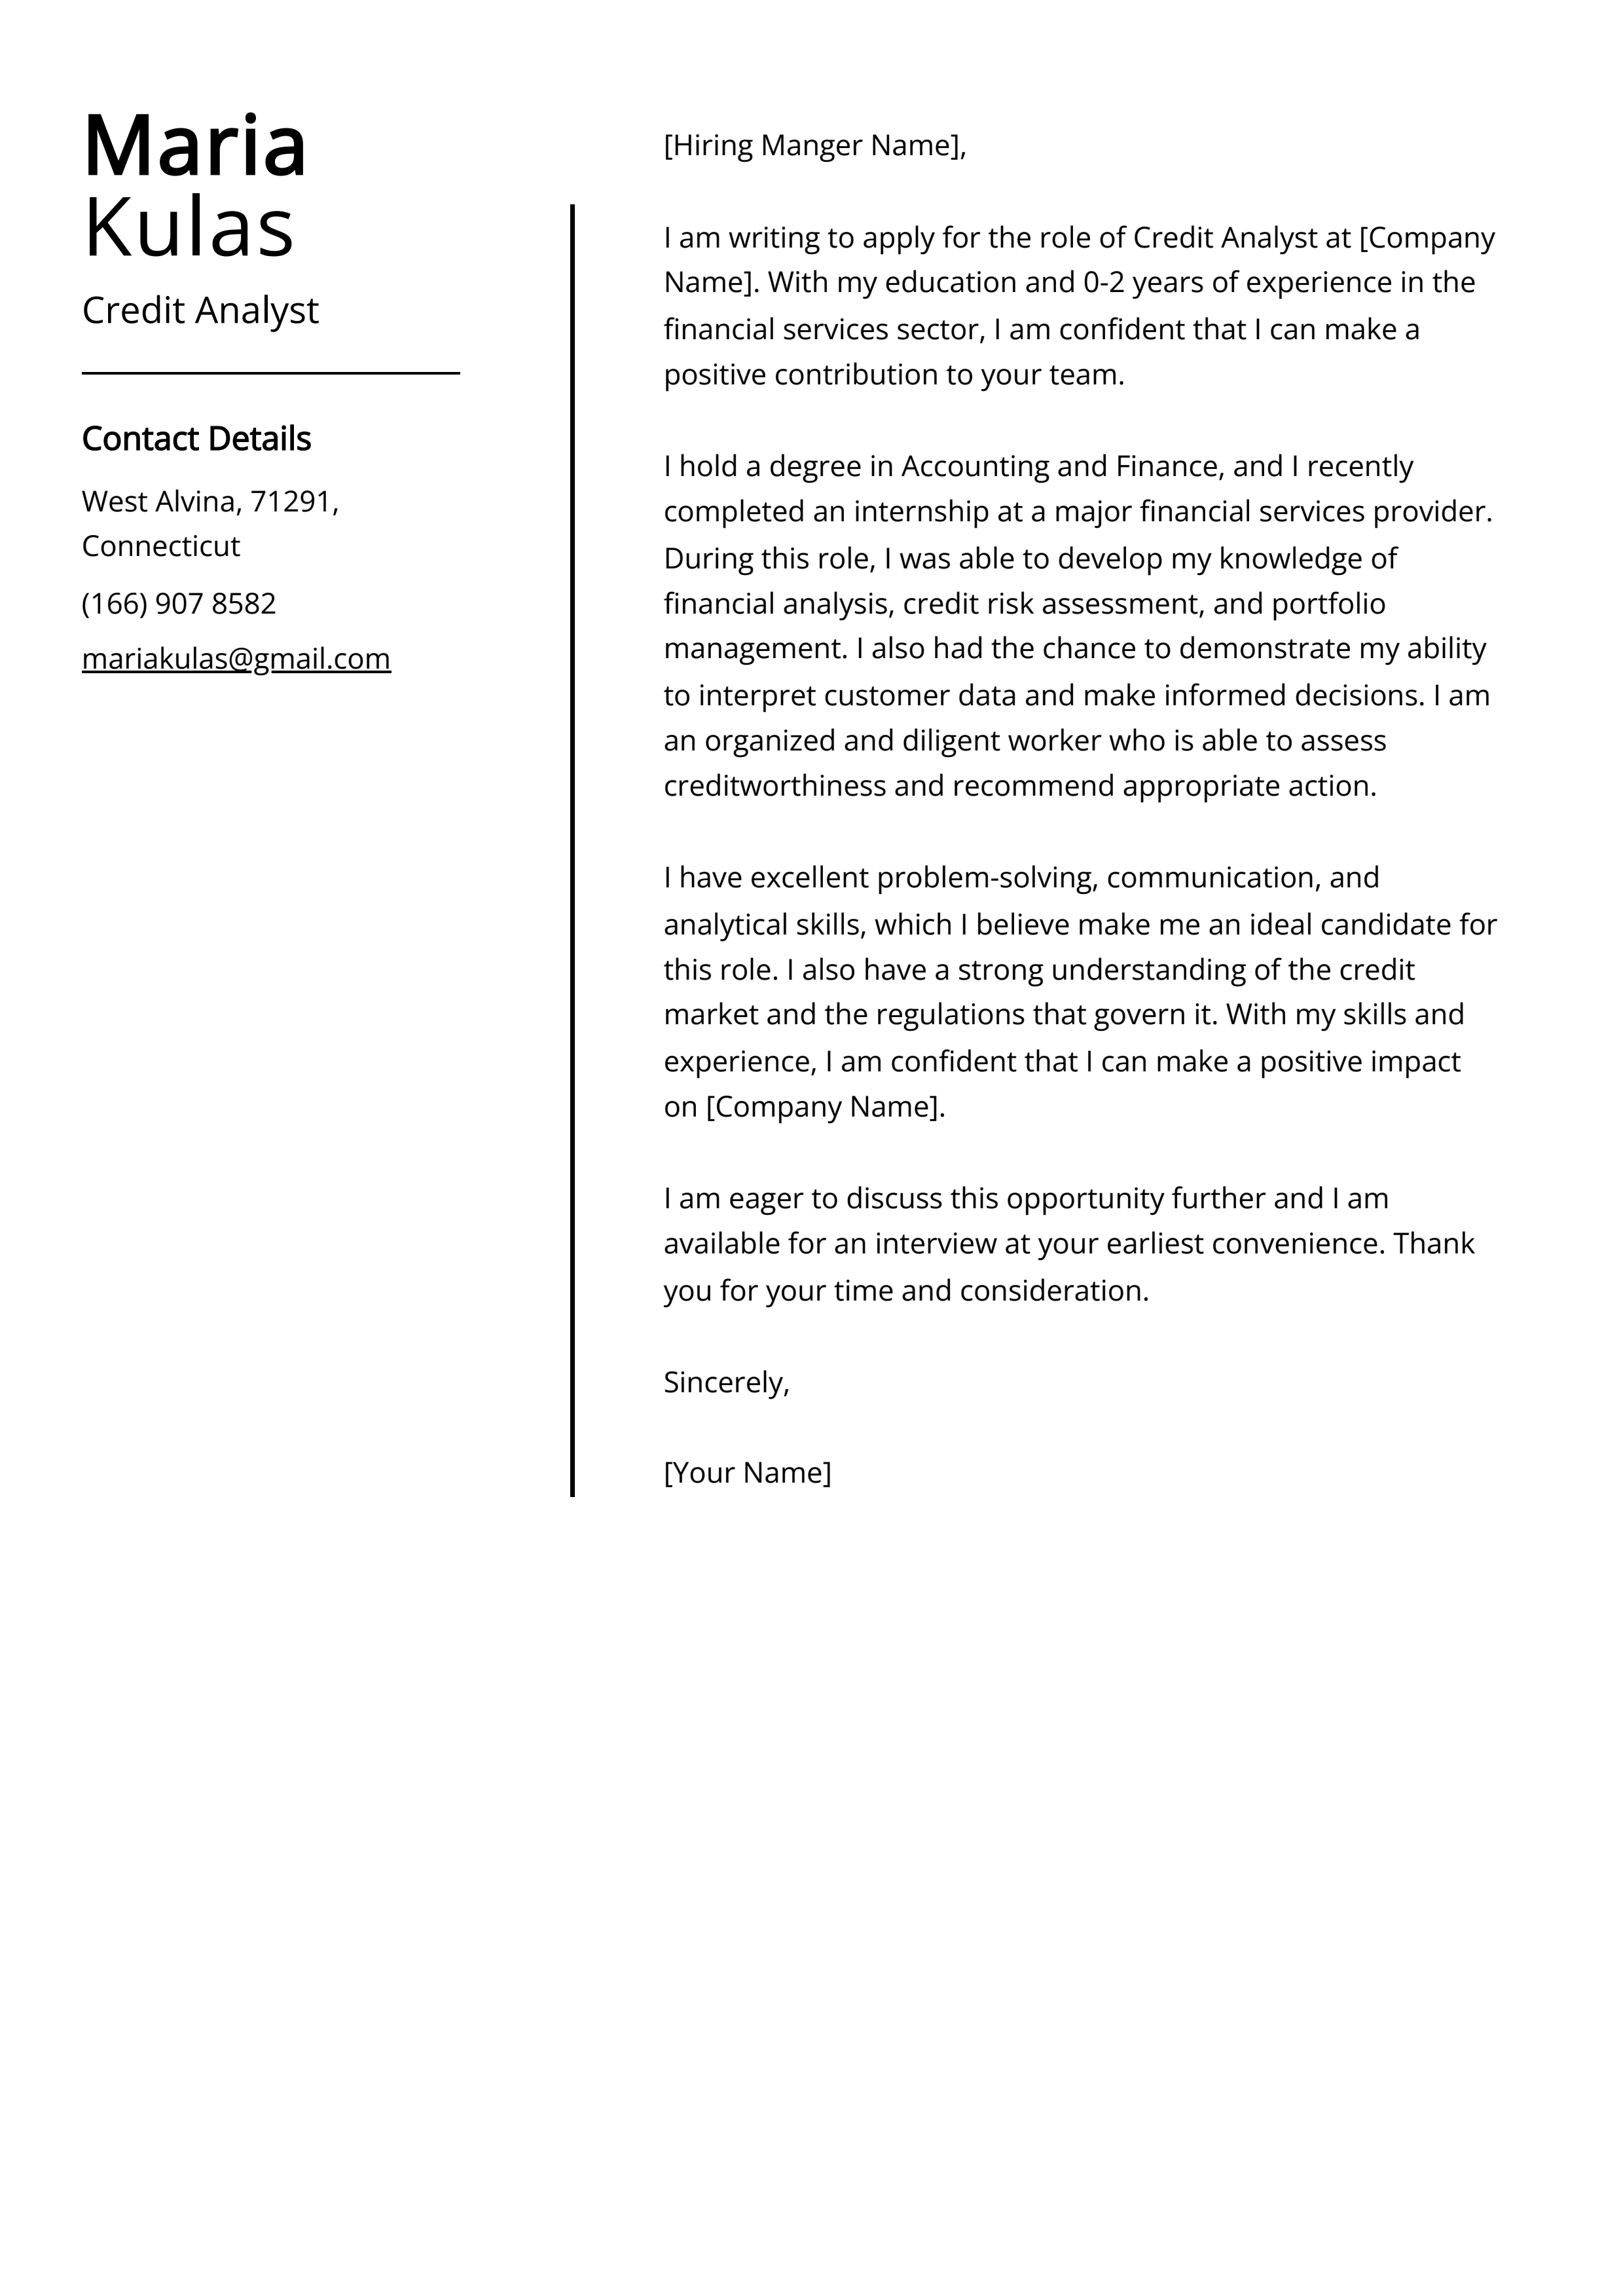 Credit Analyst Cover Letter Example